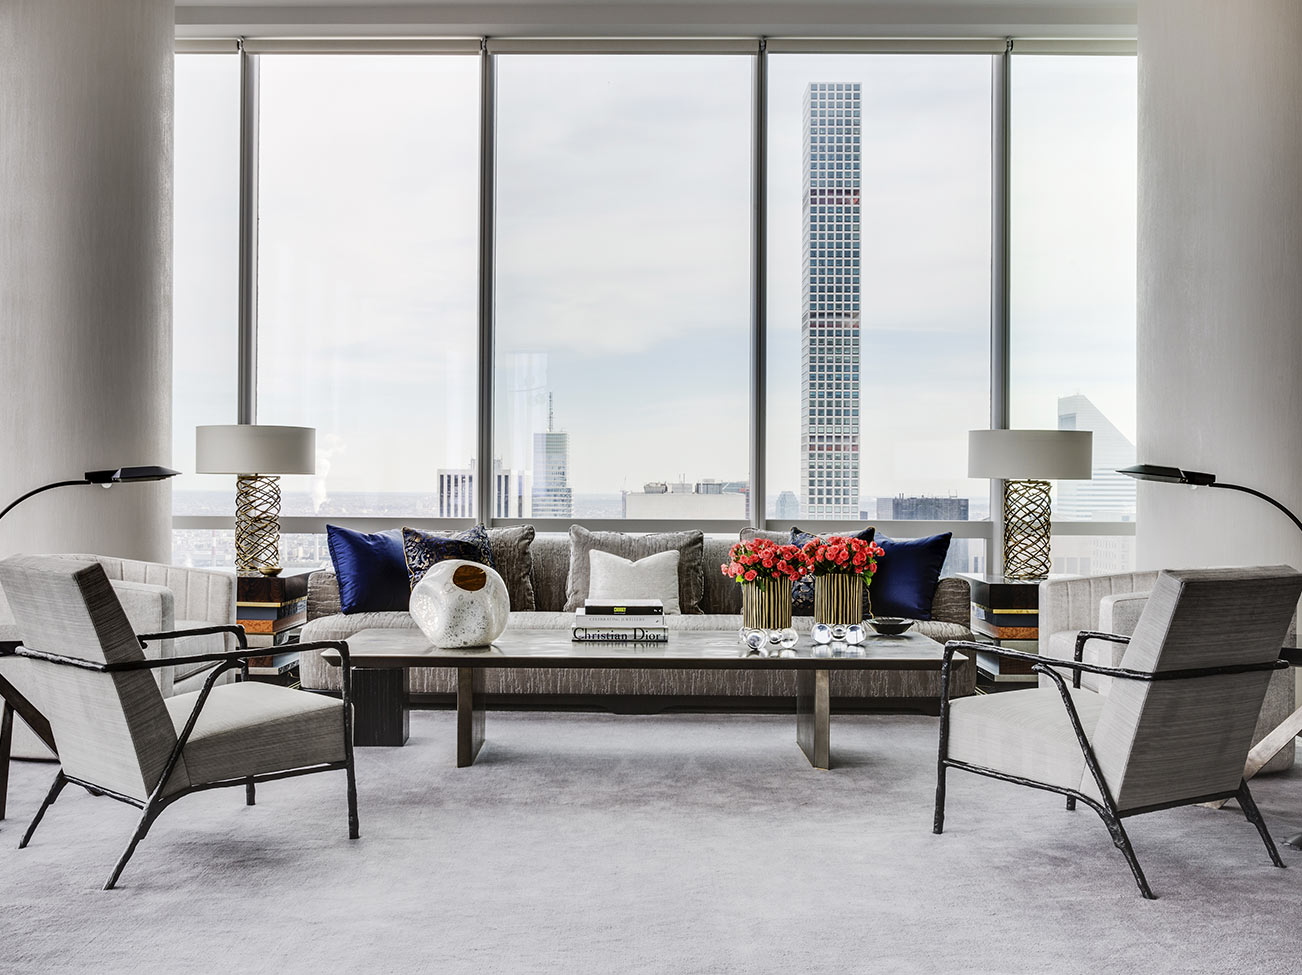 A sleek, white-painted living space with modern furnishings and massive floor to ceiling windows overlooks a cityscape.